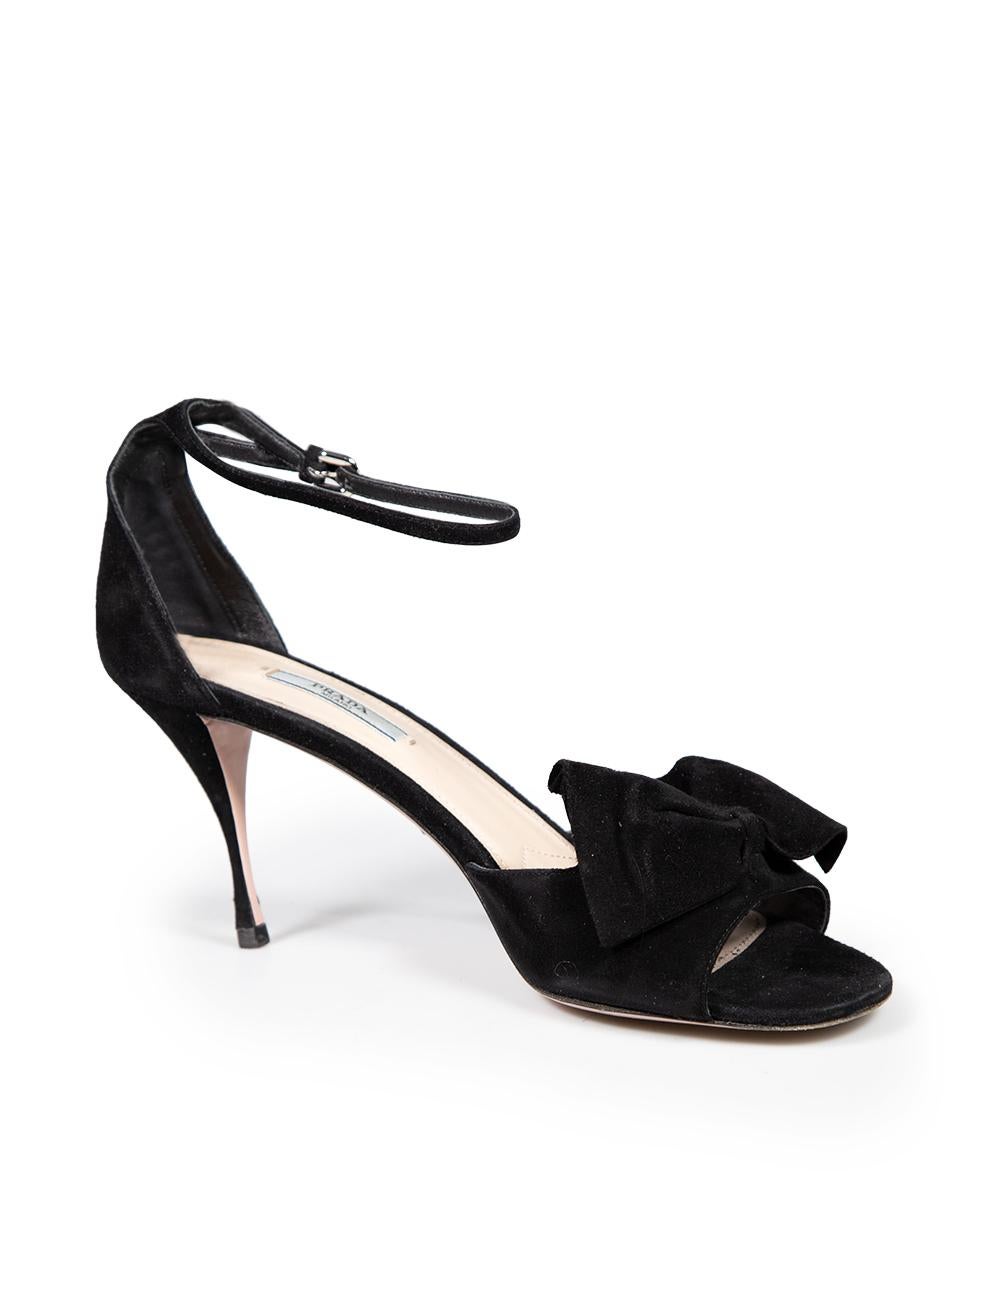 CONDITION is Good. Minor wear to sandals is evident. Light abrasion and scratches to rear, heel and tip of both shoes on this used Prada designer resale item.
 
 
 
 Details
 
 
 Black
 
 Suede
 
 Sandals
 
 Mid heel
 
 Open toe
 
 Bow detail
 
